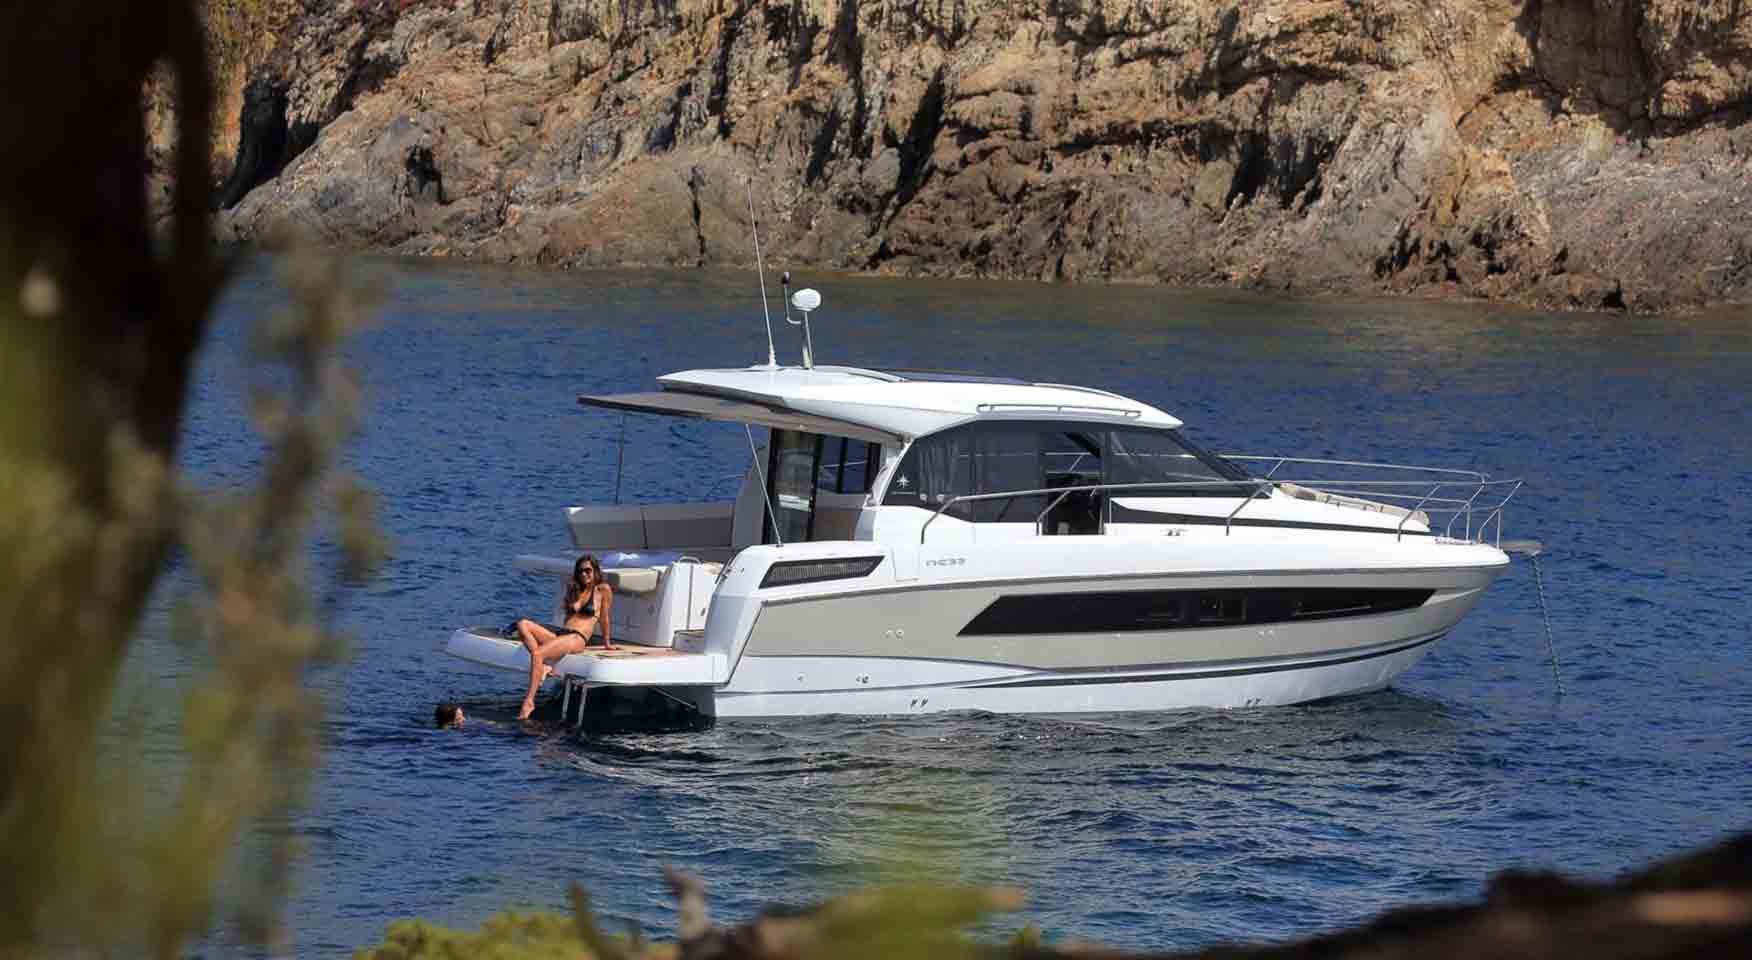 Jeanneau NC 33: An Excellent Motor Yacht To Charter